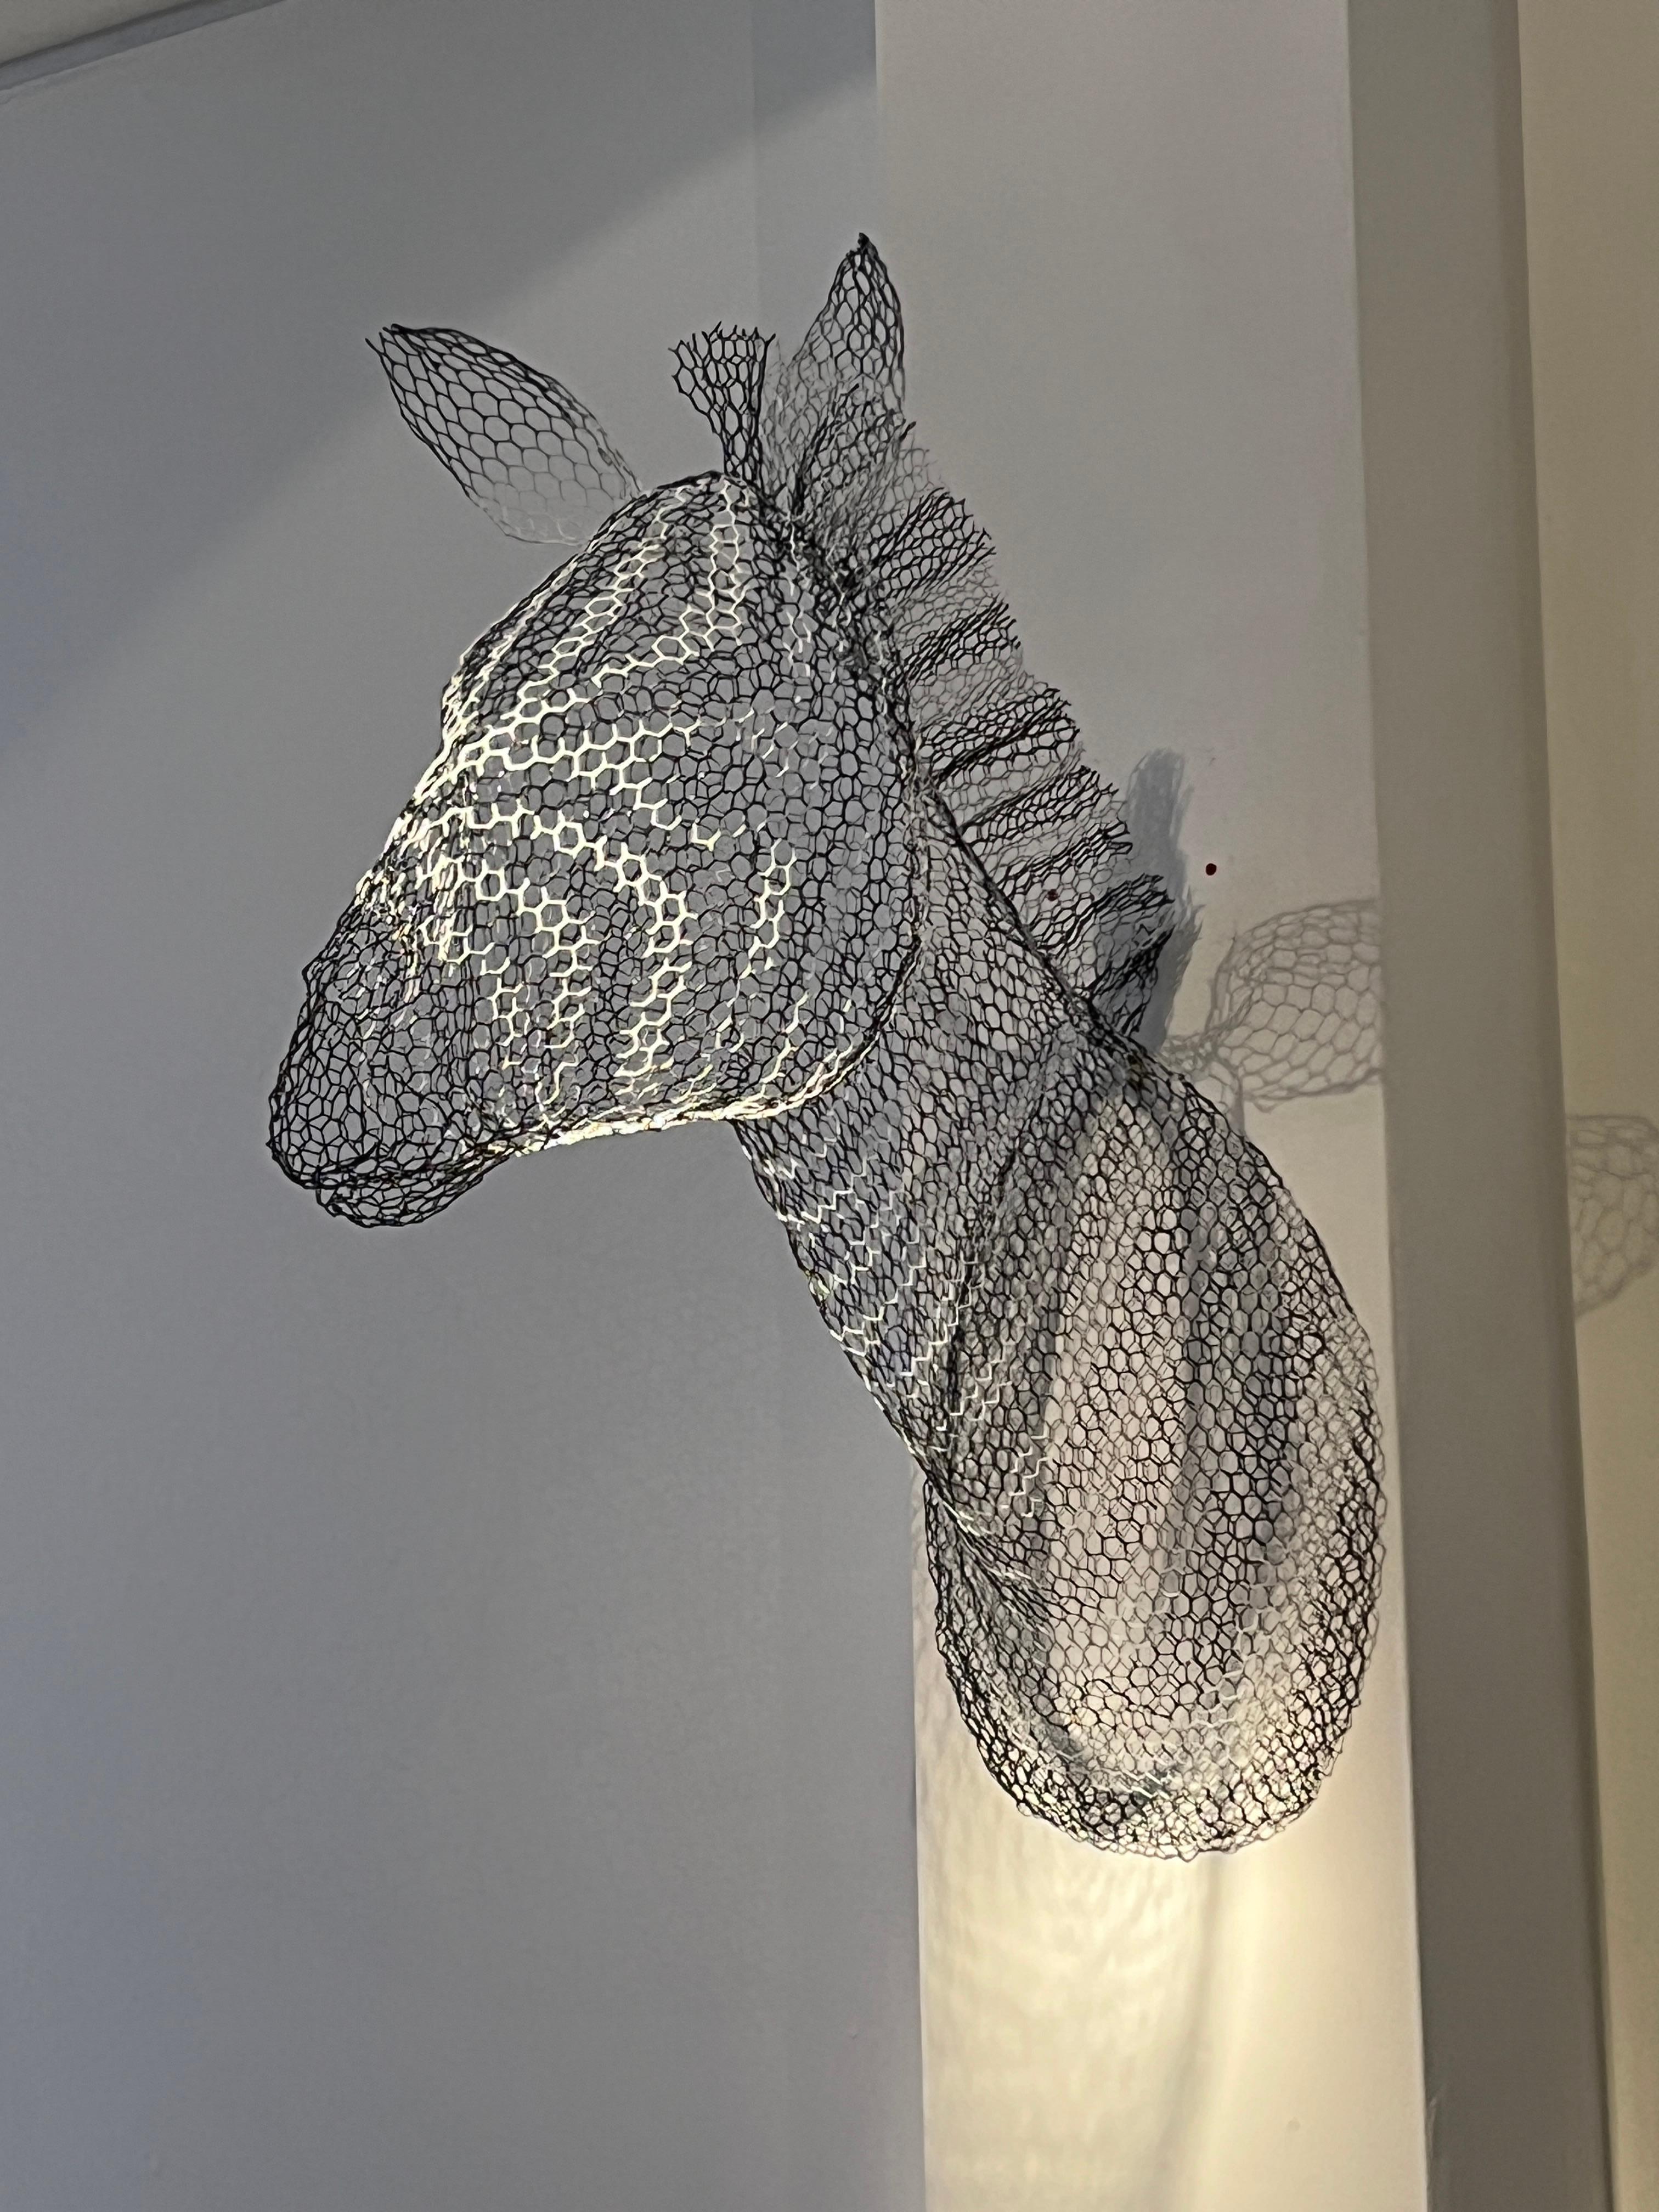 Life-sized, impressive hand-formed sculpture of a zebra head, finished in black and white enamel paint.